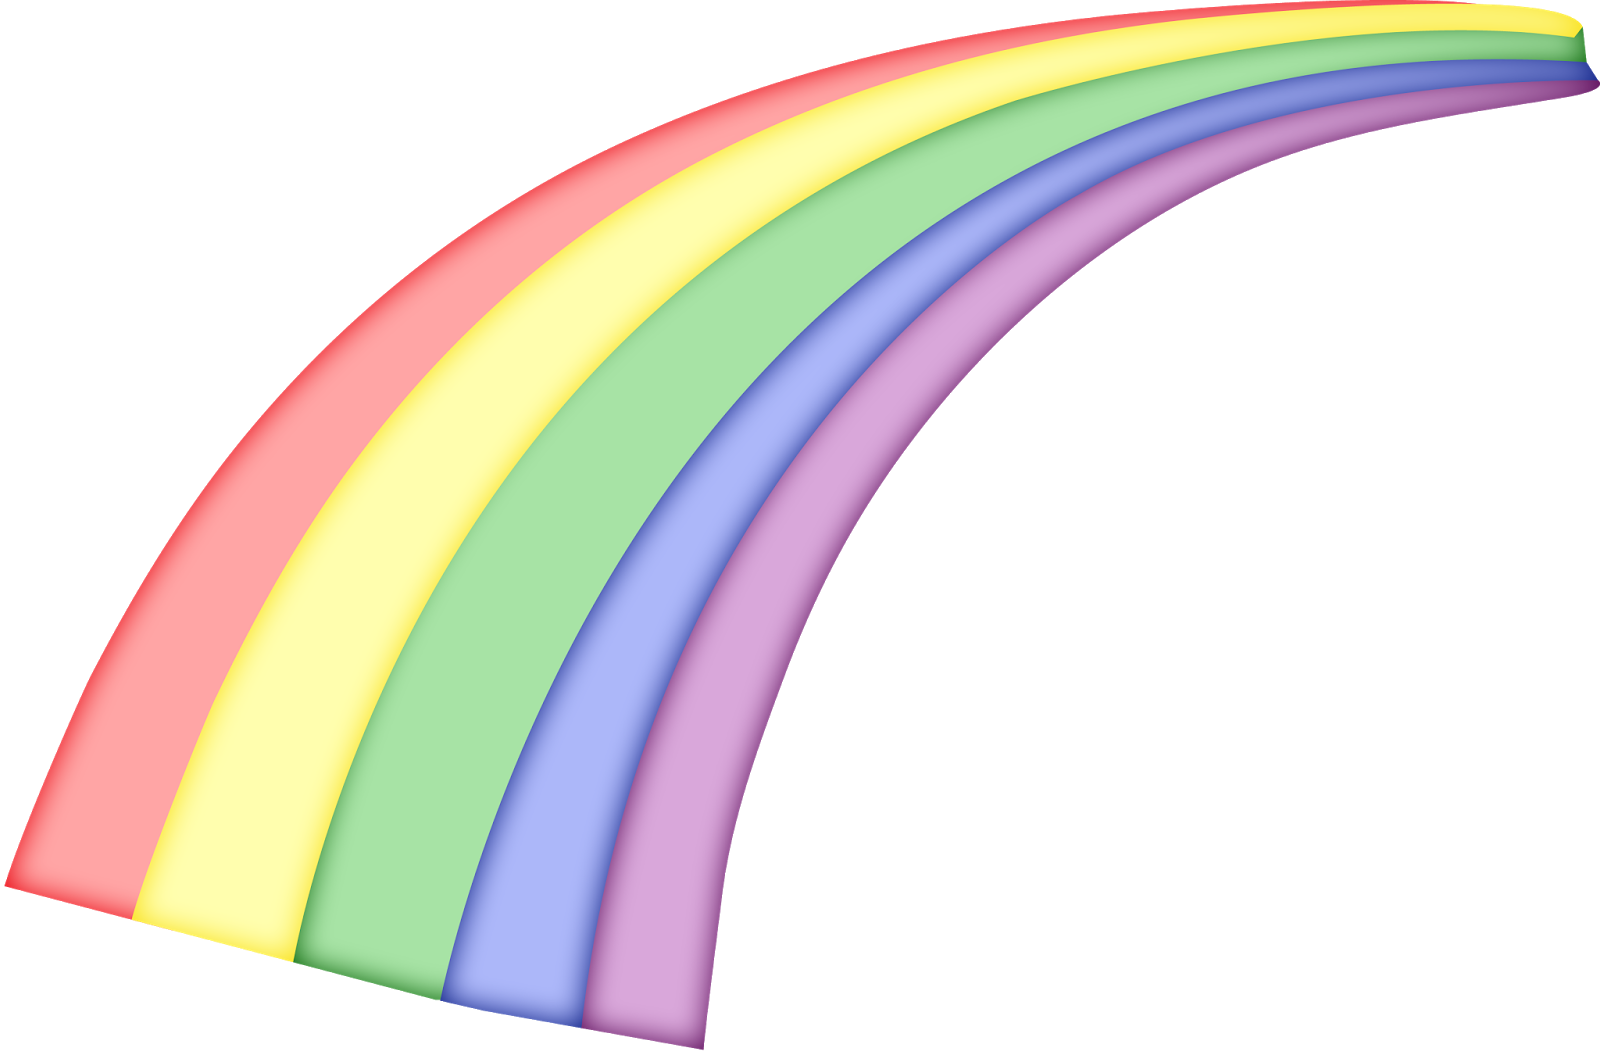 0 Result Images of Fundo Arco Iris Png - PNG Image Collection